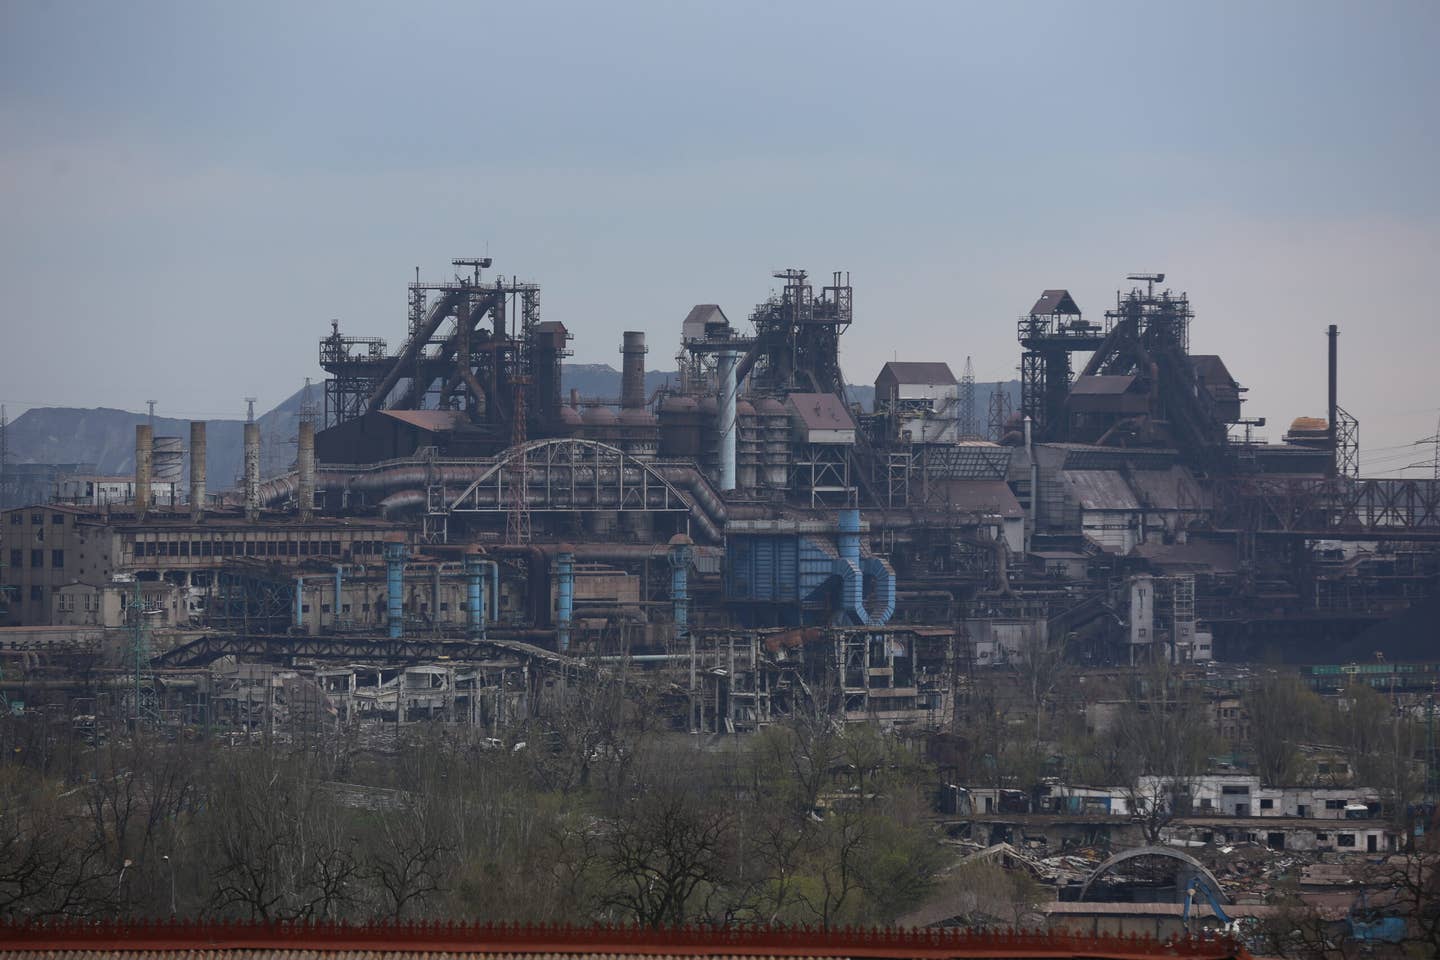 A view of the Azovstal plant as the Russian army has taken control of Ukraine's besieged port city of Mariupol except for the Azovstal plant on April 22, 2022. <em>Leon Klein/Anadolu Agency via Getty Images</em>